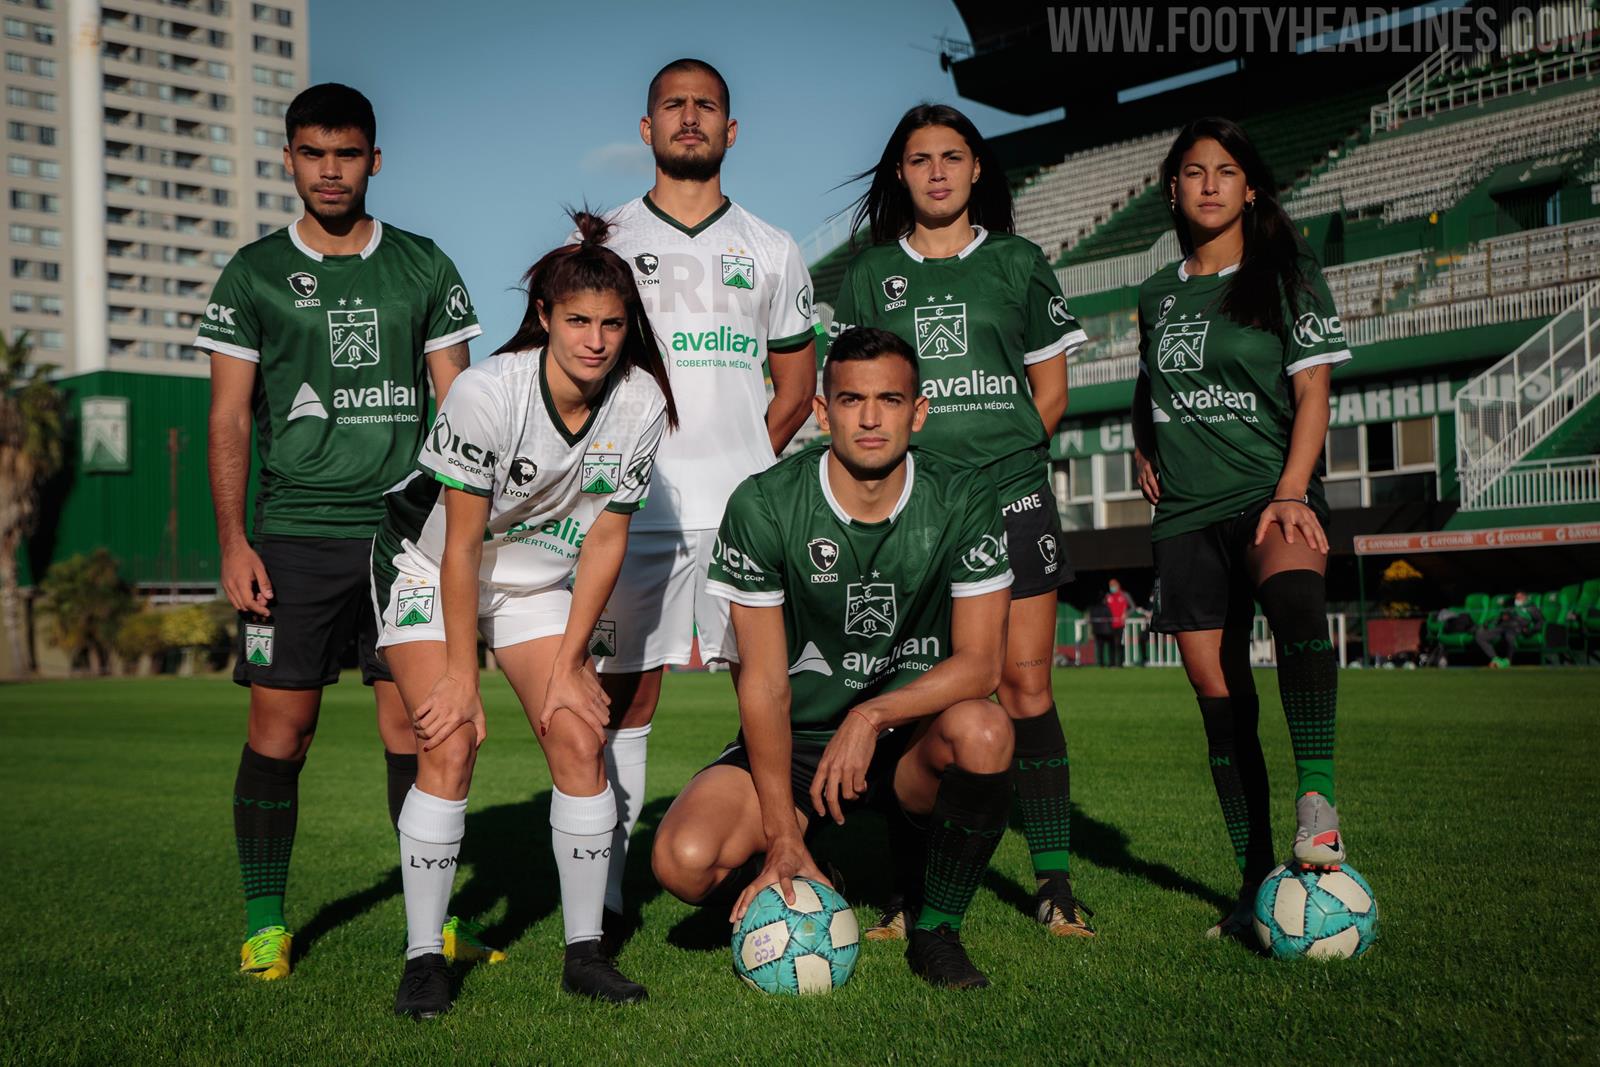 Unique Ferro Carril Oeste 21-22 Home & Away Kits Released - Two